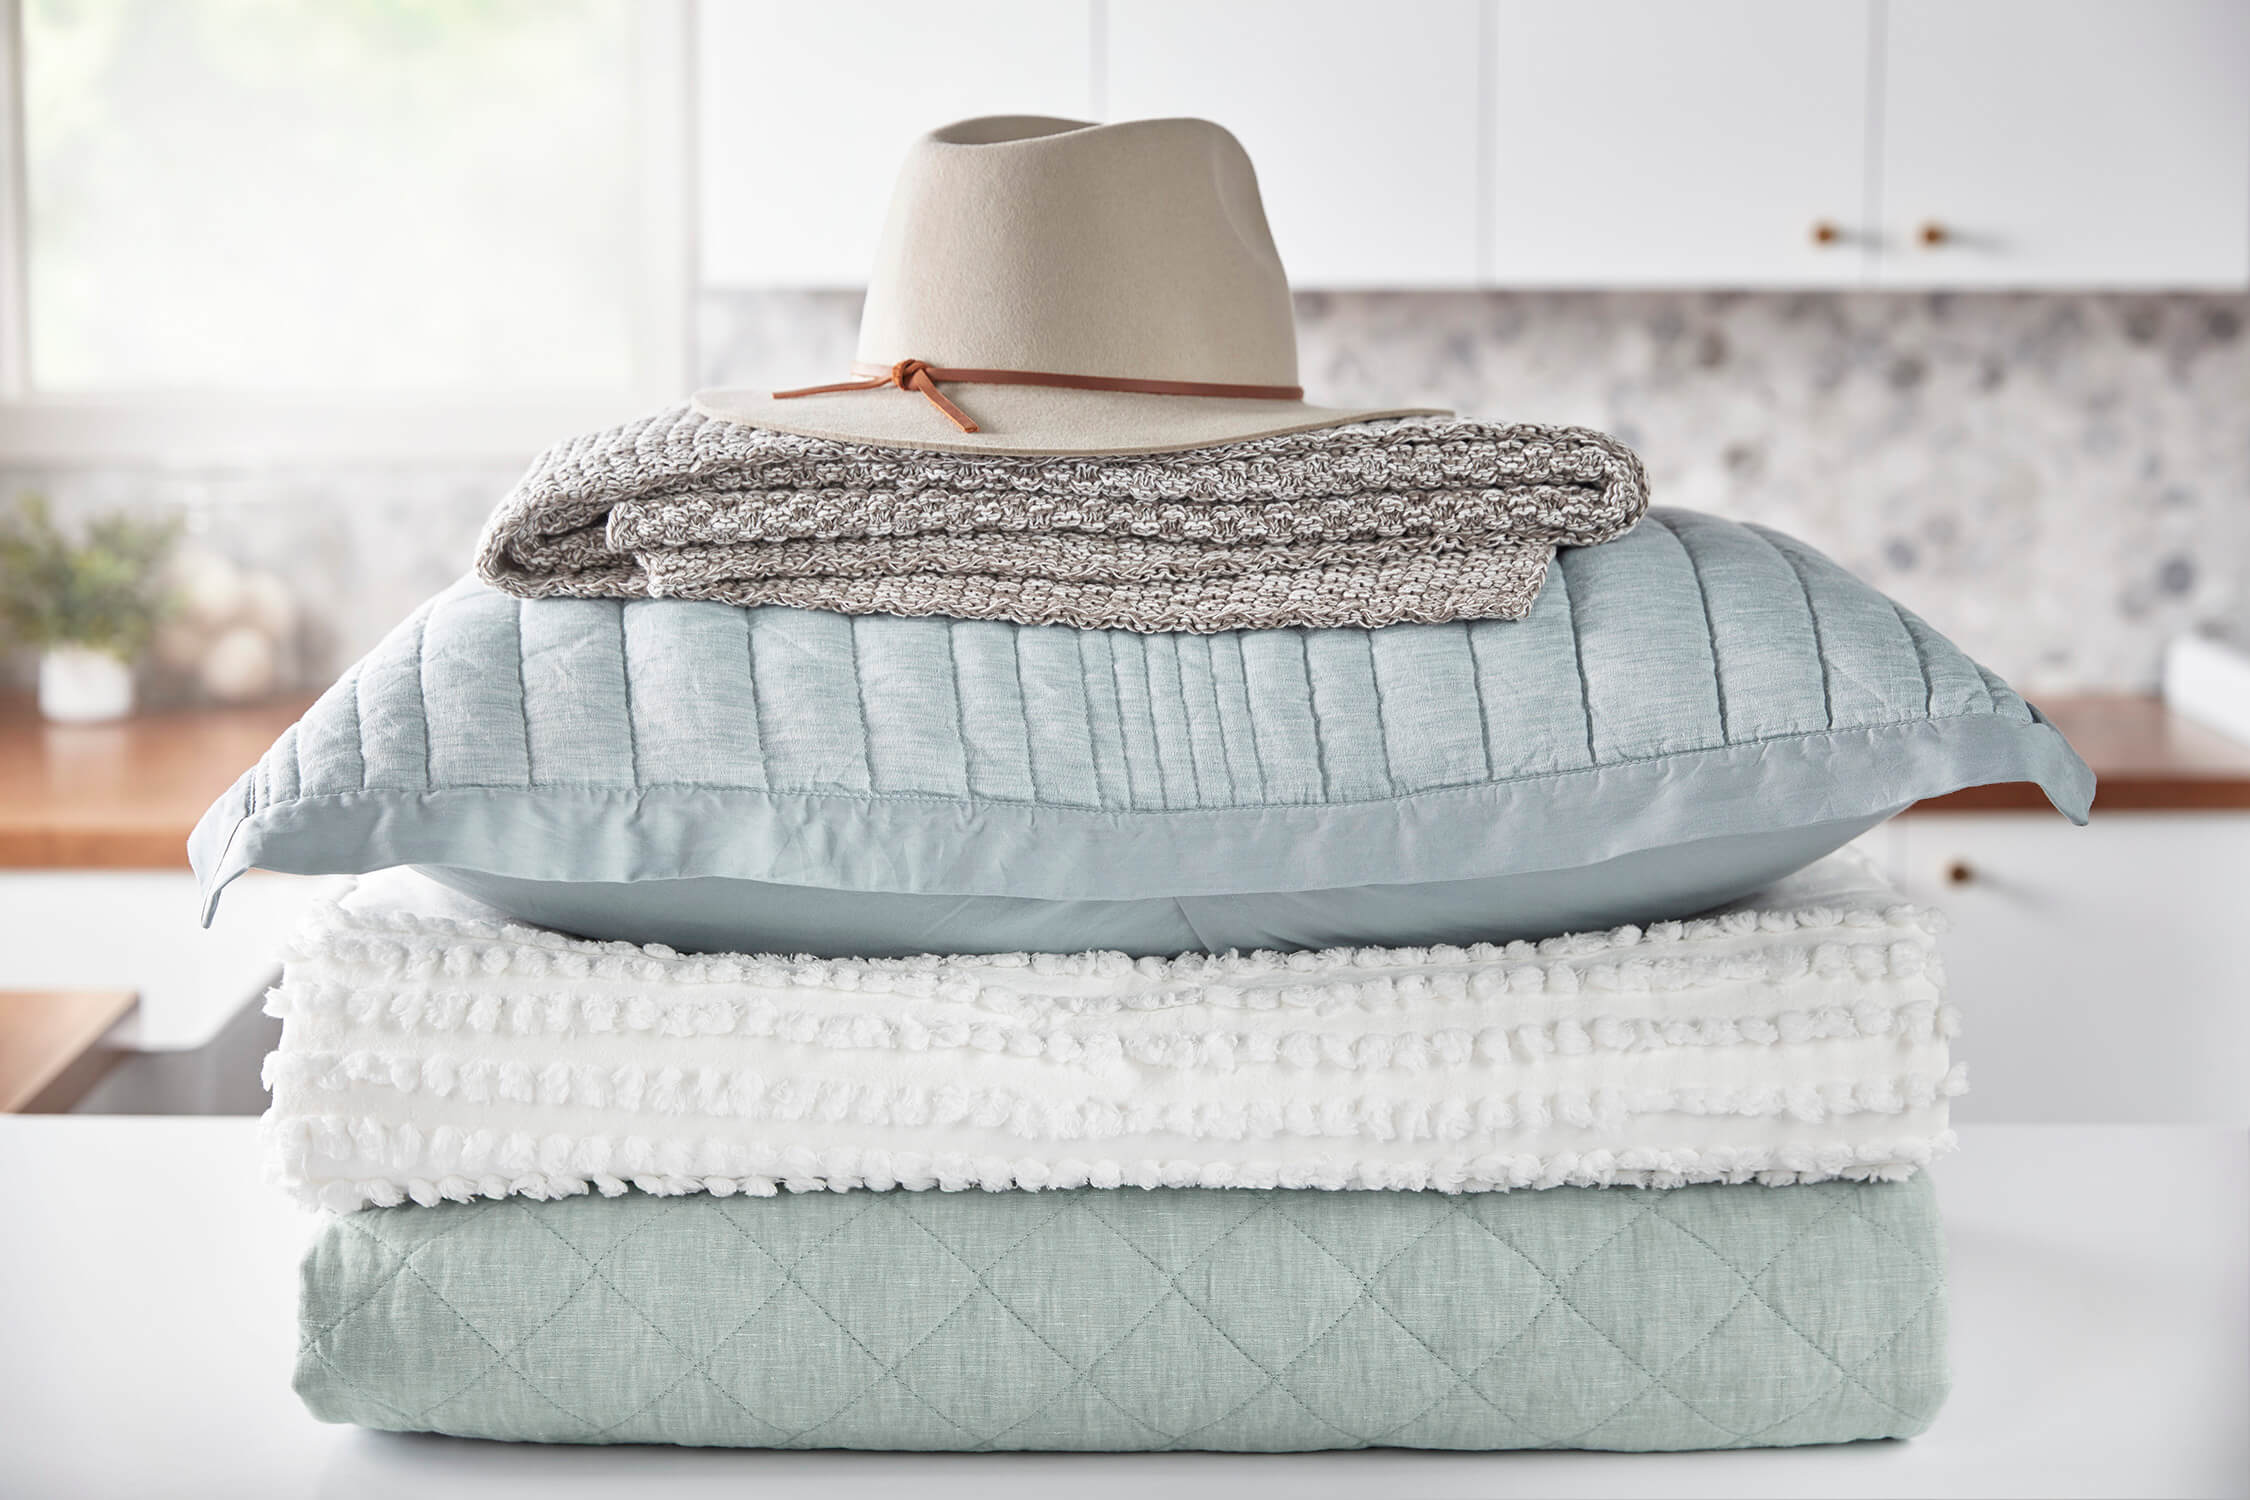 A cream colored sun hat on a stack of freshly cleaned blue linens.